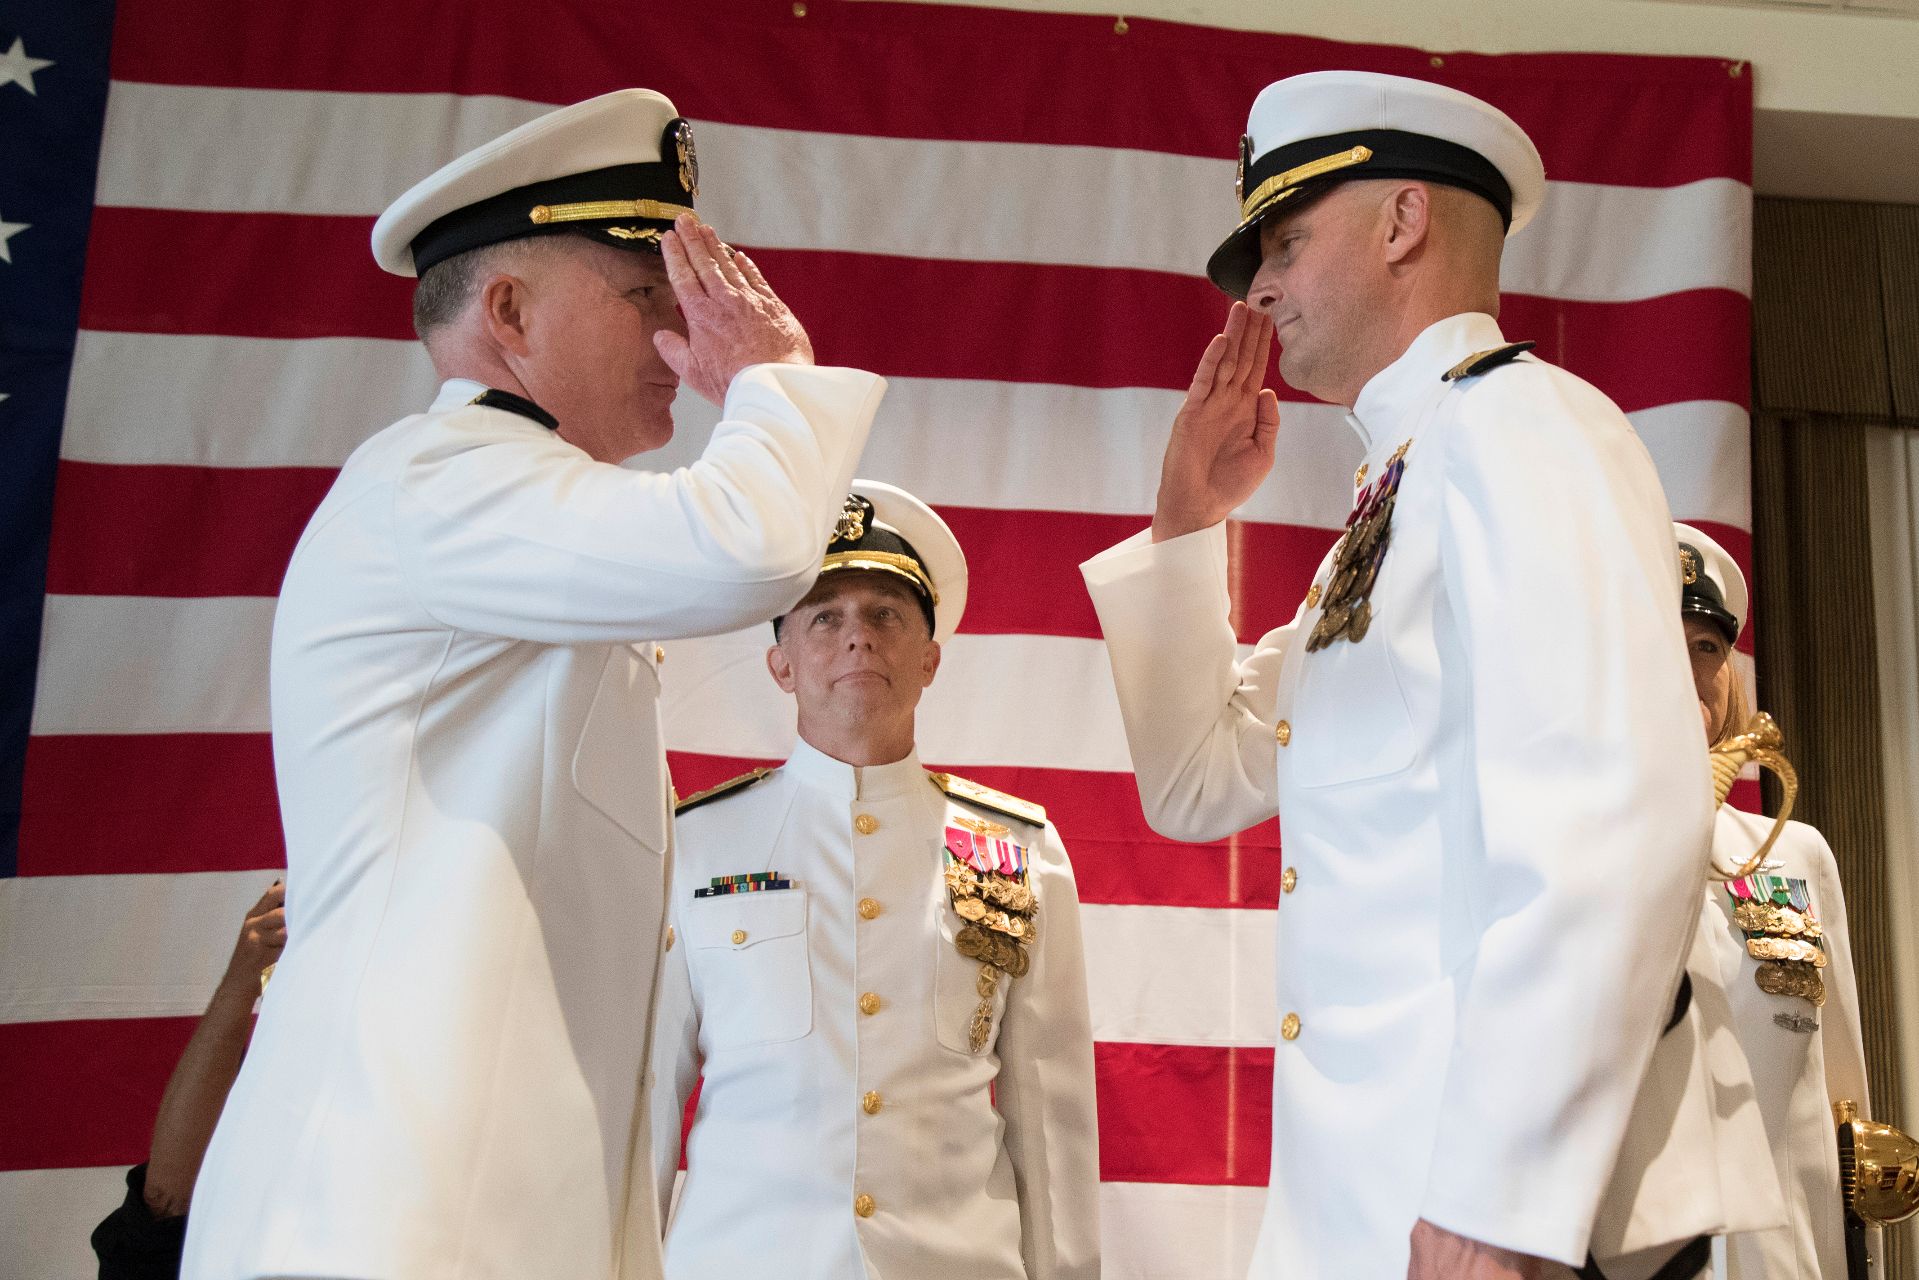 J.J. Cummings '89 (right) assumes command of USS <em>Gerald R. Ford</em> from Capt. Richard C. McCormack during the ship’s change of command ceremony, a time-honored Naval transfer of responsibility, authority, and accountability from one individual to another. (U.S. Navy photo by Mass Communication Specialist 2nd Class Cat Campbell)